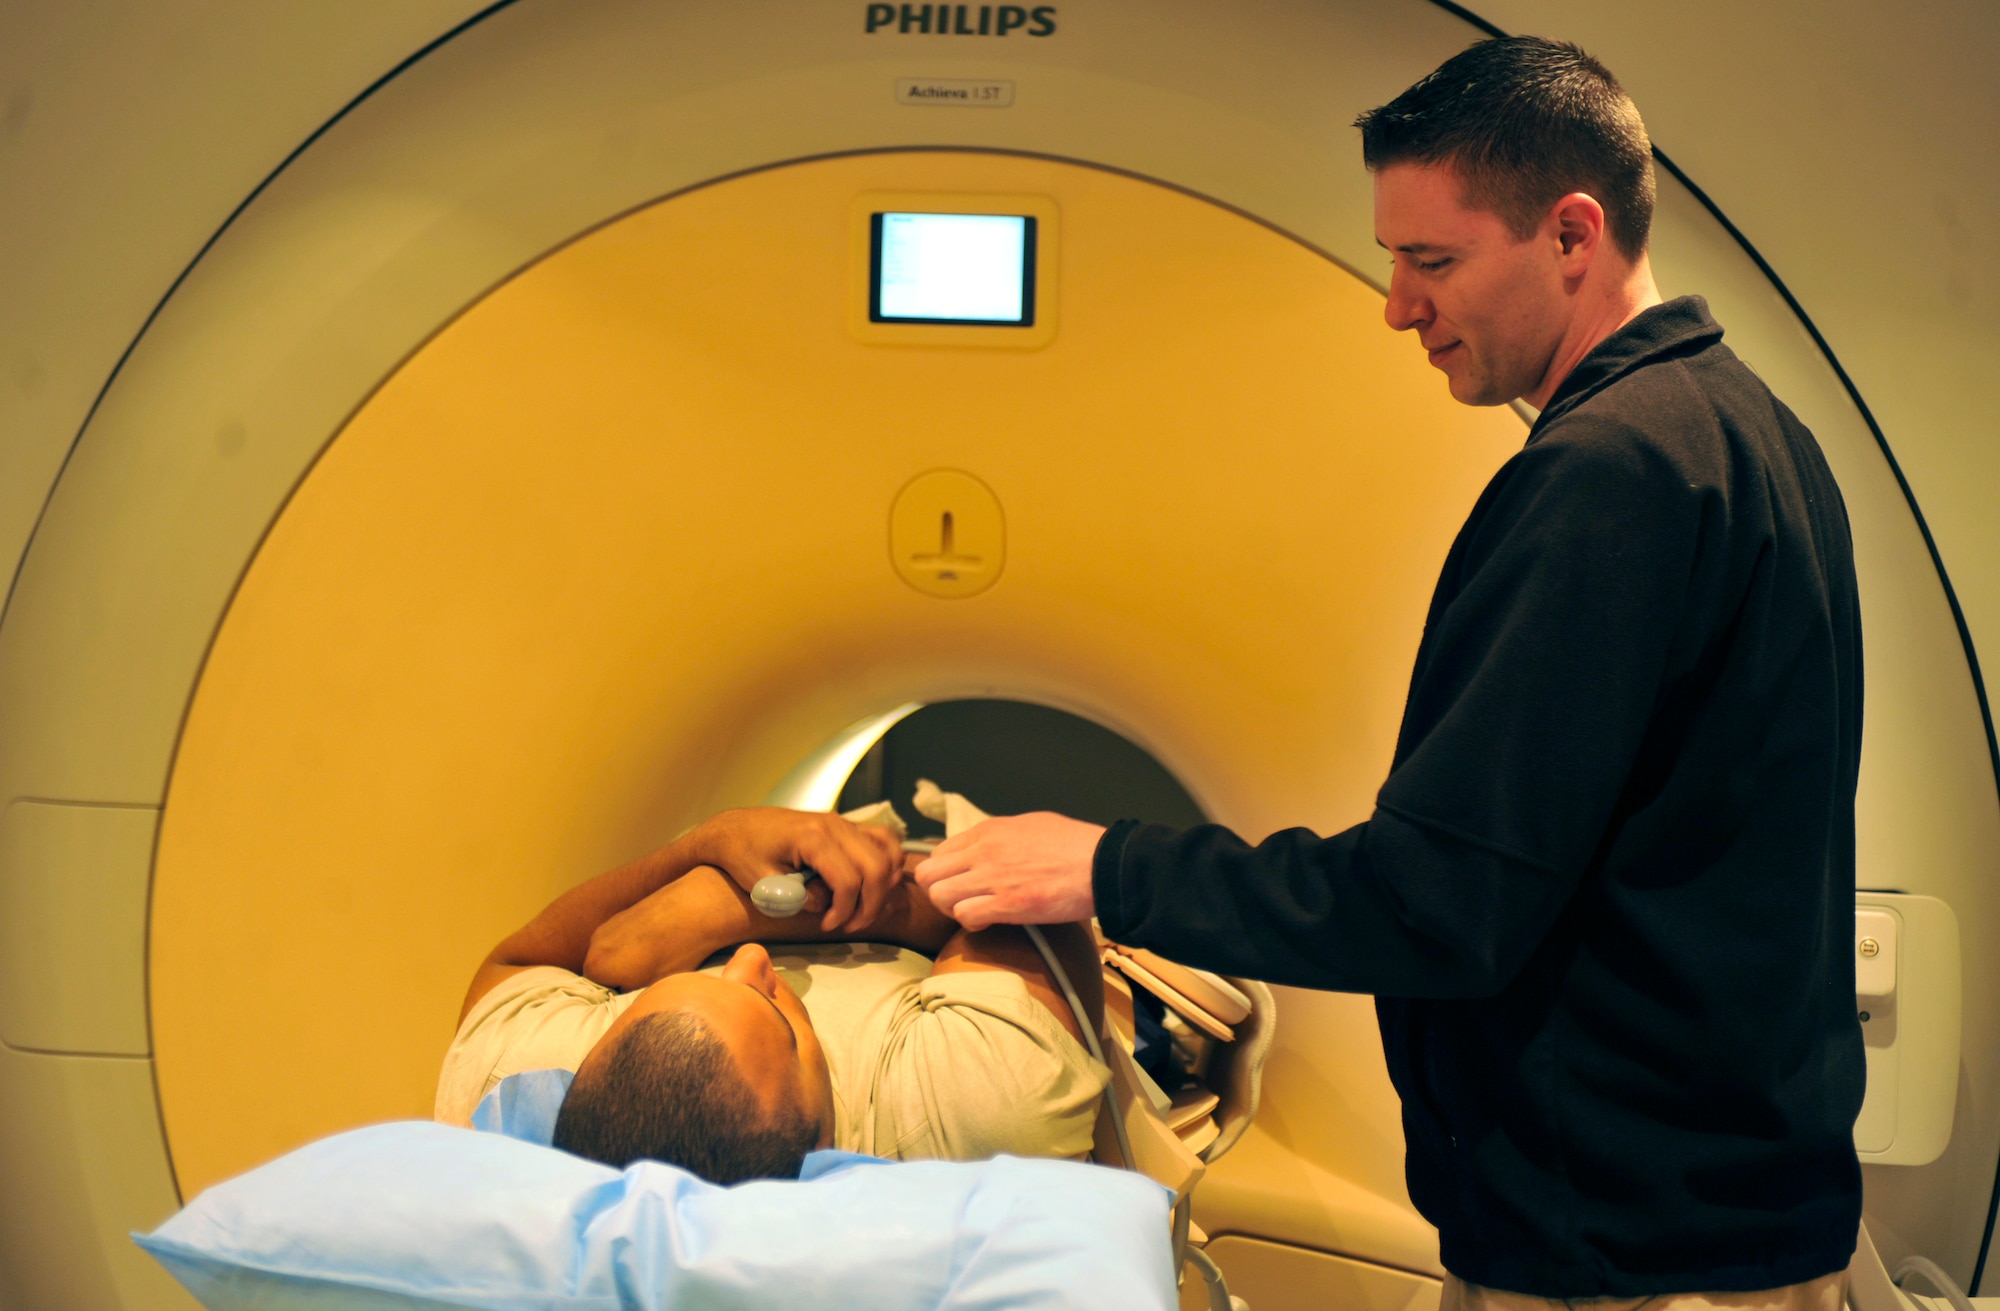 Cody Turner prepares a patient for his magnetic resonance imaging scan at Bagram Airfield, Afghanistan, April 3, 2012. Turner is an MRI technician with the 455th Medical Support Squadron and hails from Avon, Conn. The MRI machine allows medical personnel to procure a better image of certain body parts than an X-ray can provide. (U.S. Air Force photo/Airman 1st Class Ericka Engblom)